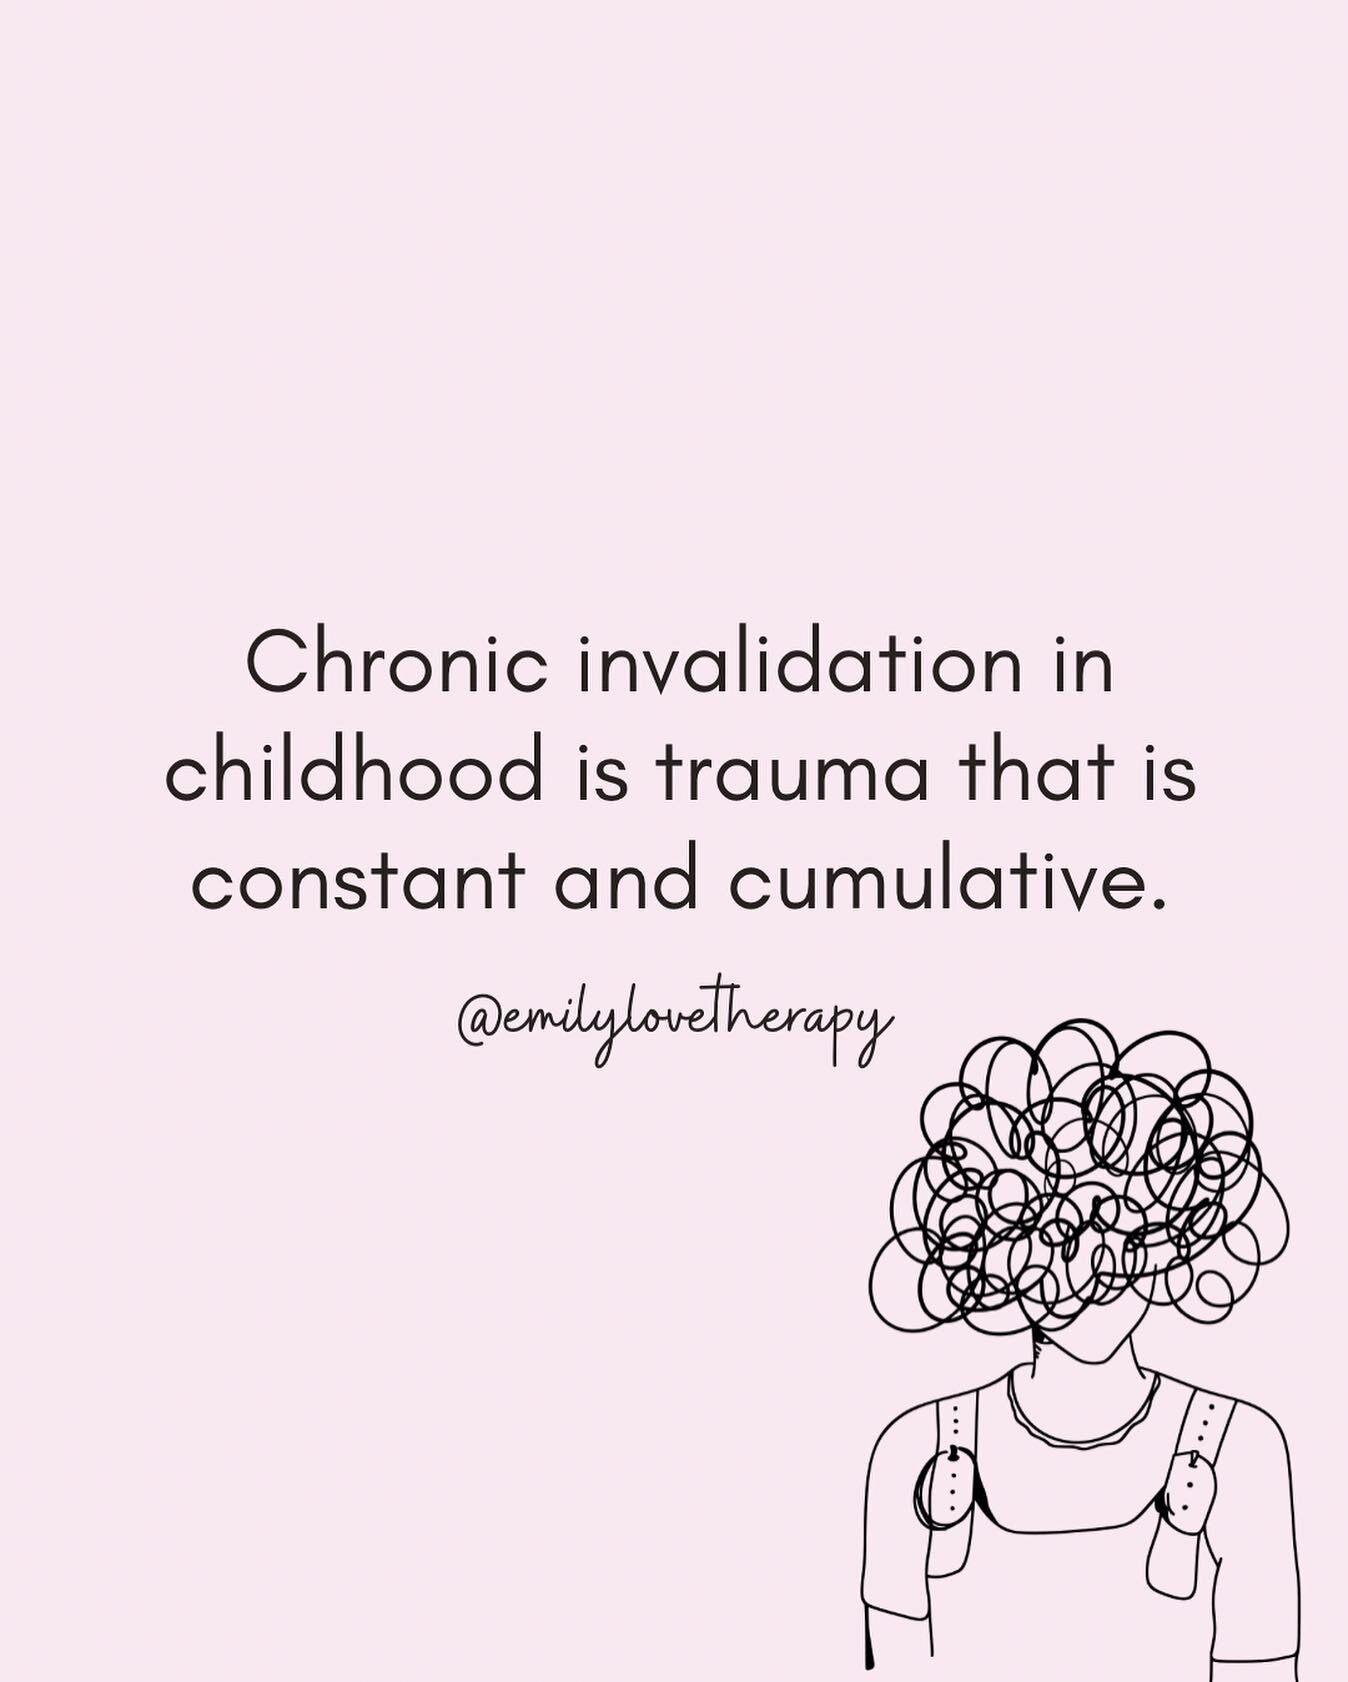 You may have attachment trauma if you had a parent who failed to attune to your emotional experience or to who you are. #trauma #attachmenttrauma #therapyforwomen